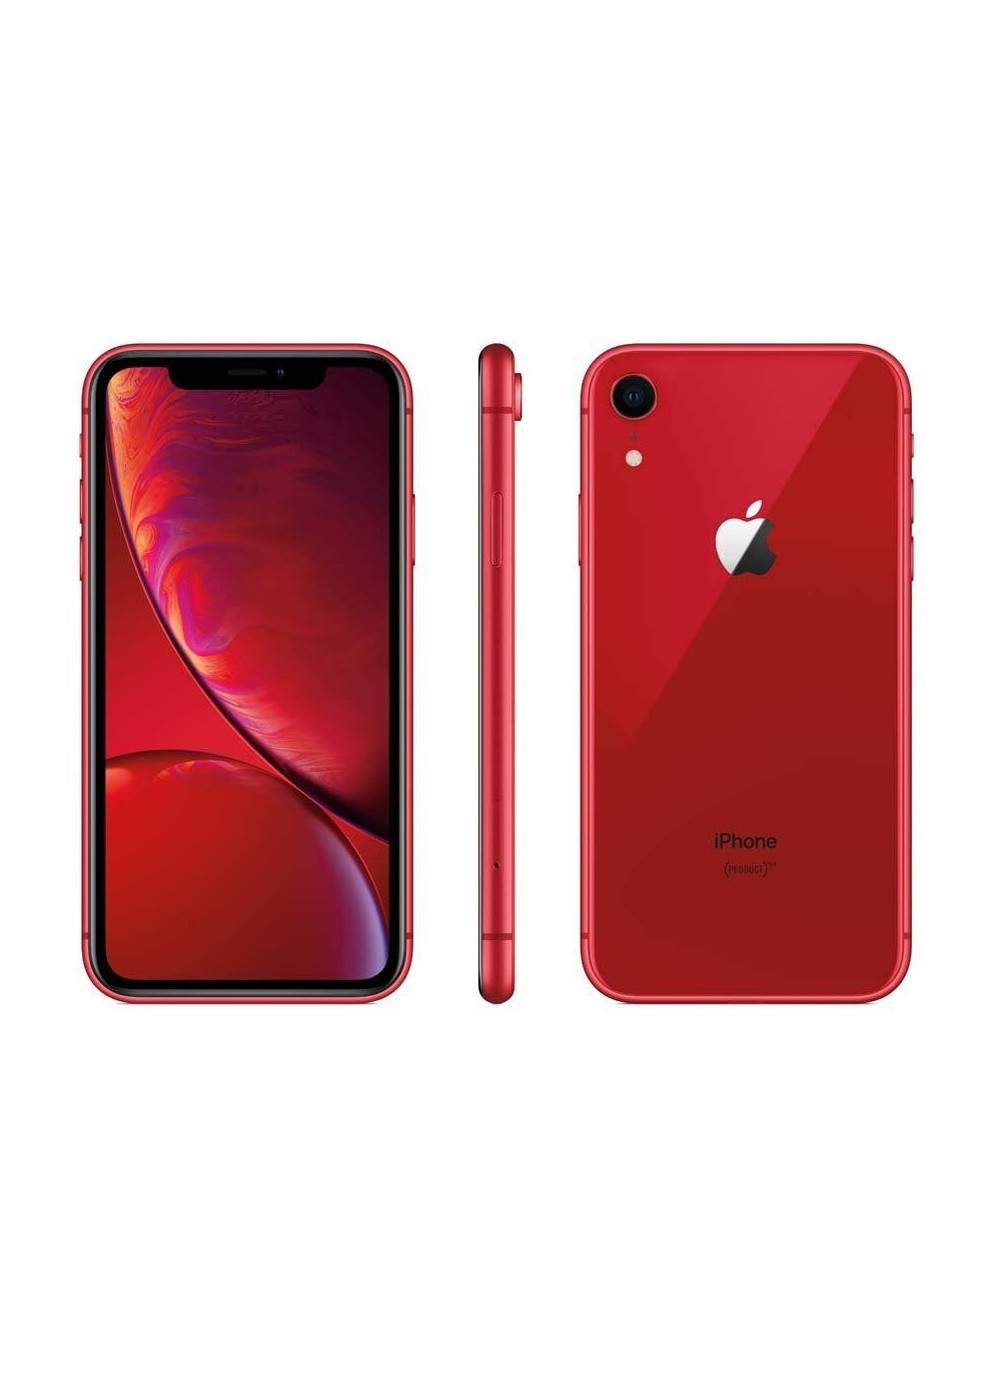 iPhone XR 128Gb (Red) (MMRYE2) Apple (242115862)